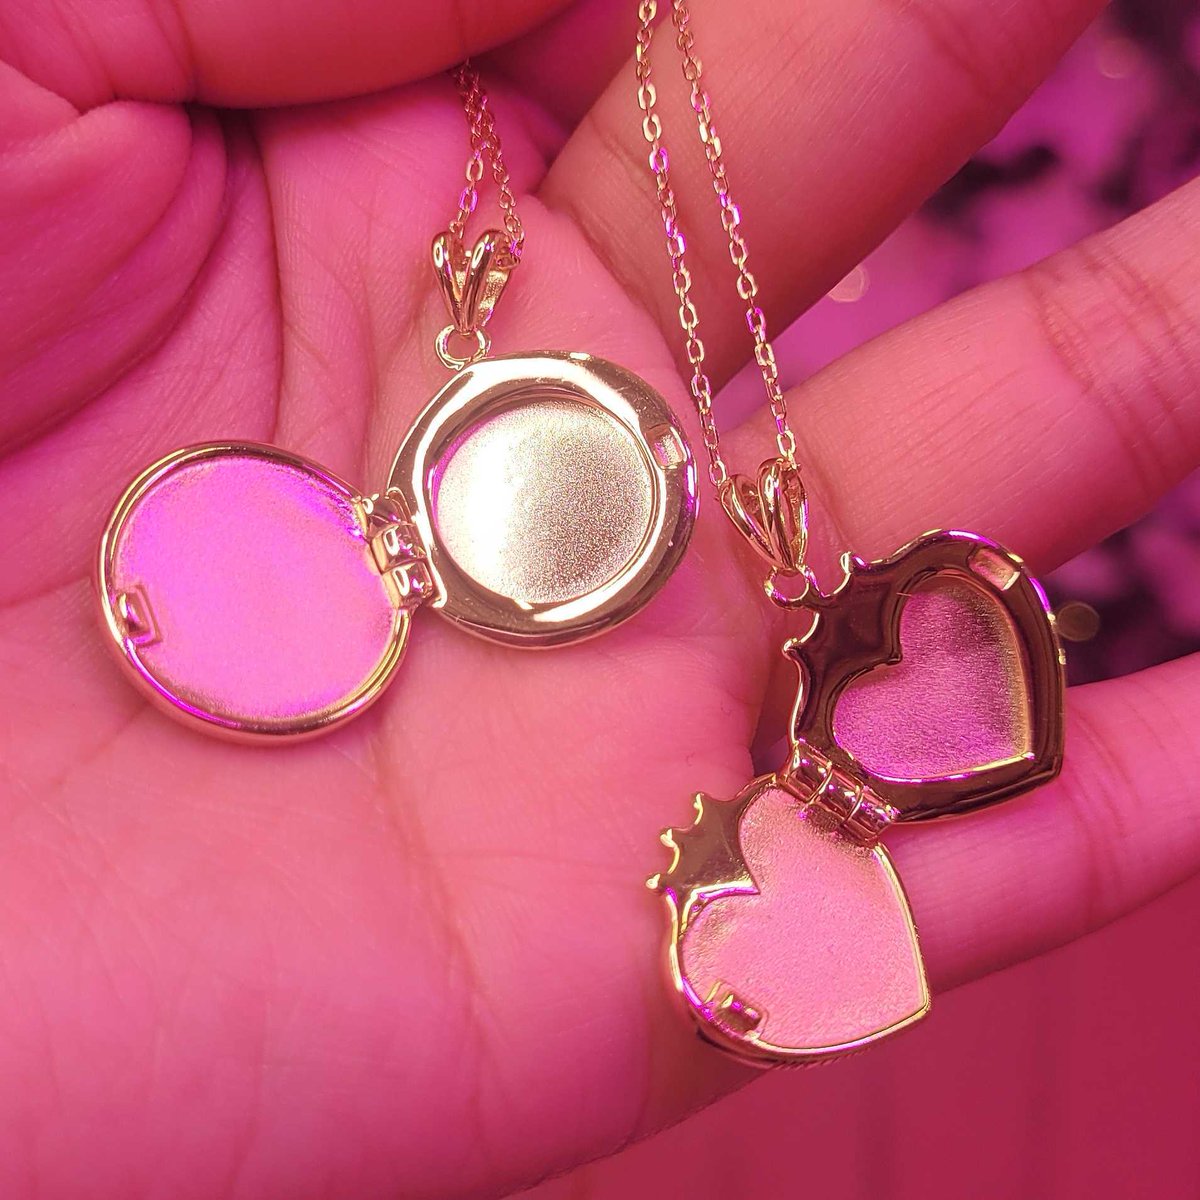 GIVEAWAY!💫
1 lucky random winner will win both of these sailor moon inspired lockets we made! Crafted in sterling silver .925 with 14kt gold plating +pink opal inlays +colorful stones✨
Follow +RT +❤️+ tag a friend below to enter!
Nov 26 last day to enter!
good luck!